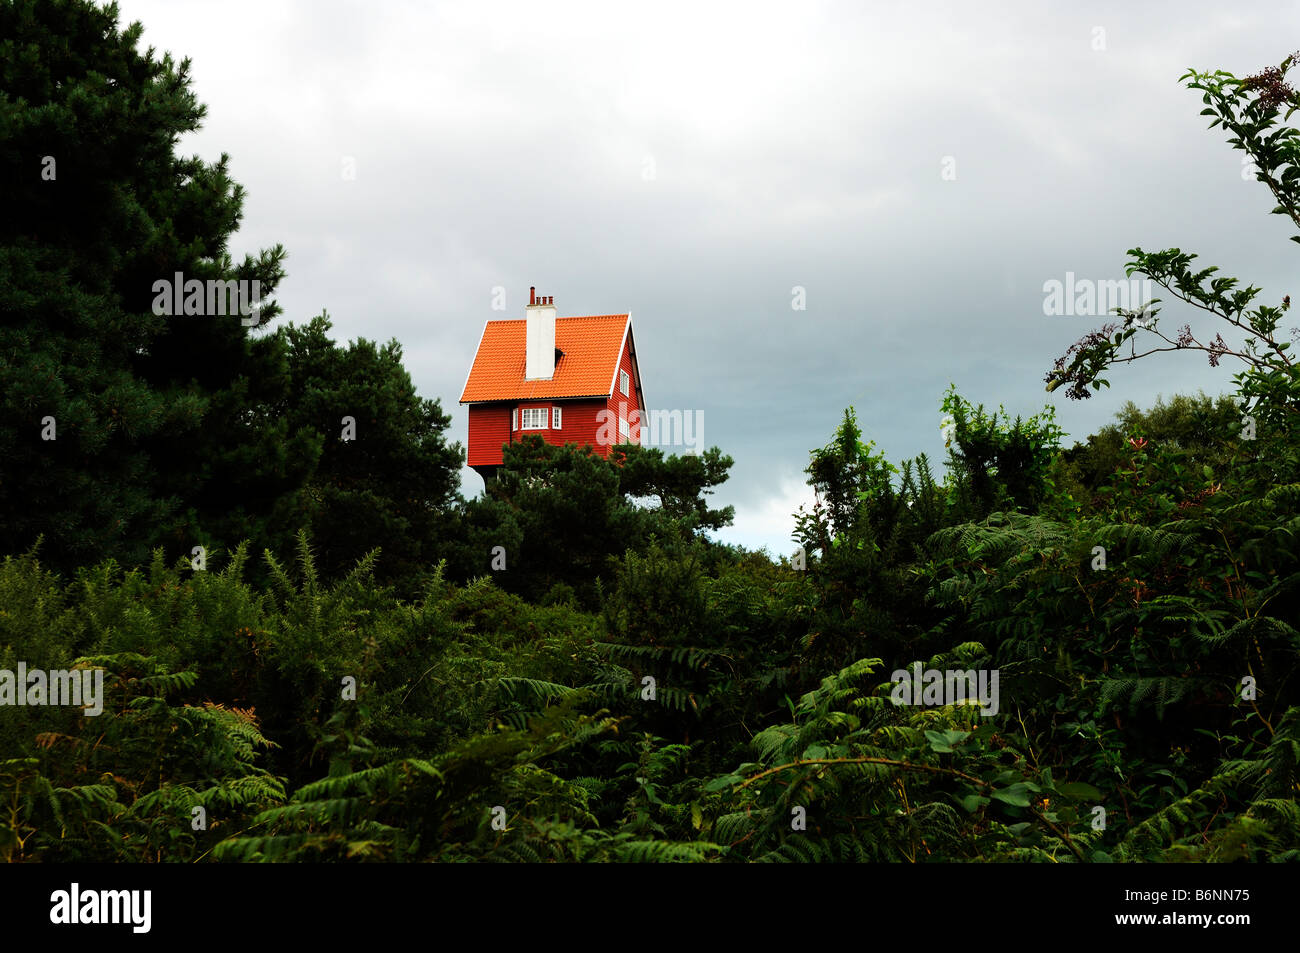 'House In The Clouds' Thorpeness, Essex, England Stock Photo